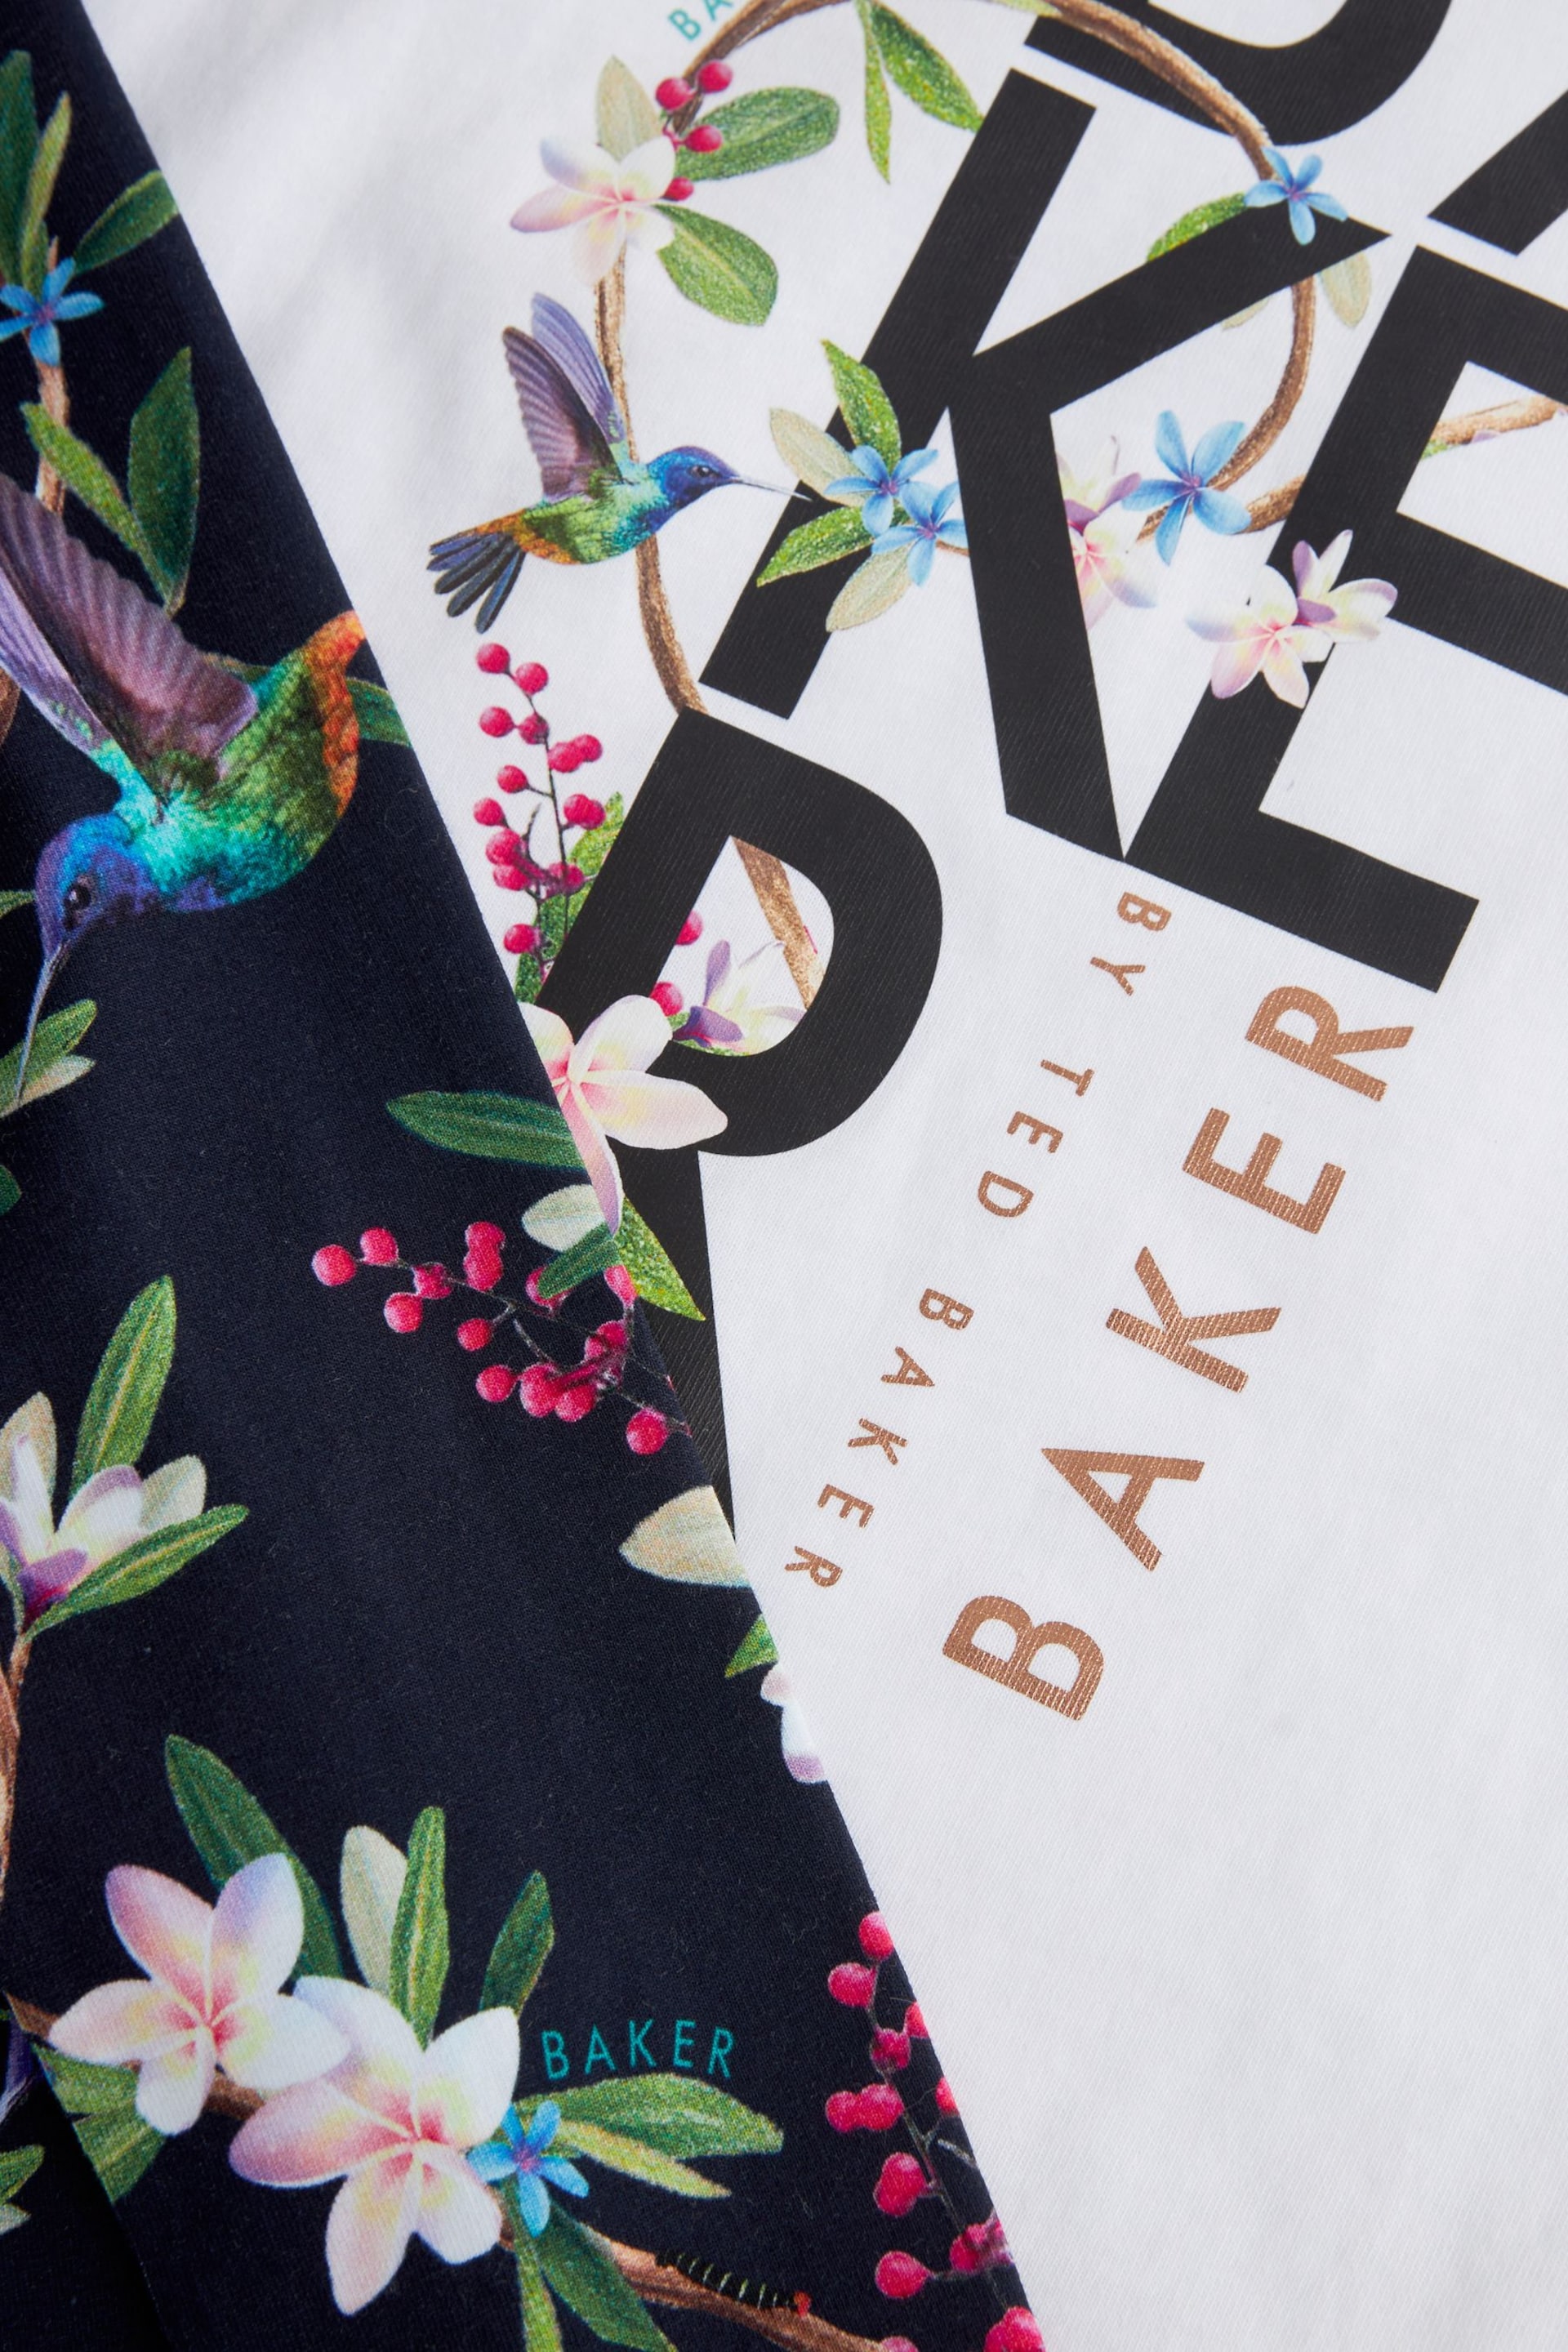 Baker by Ted Baker Navy Graphic T-Shirt and Legging Set - Image 11 of 11